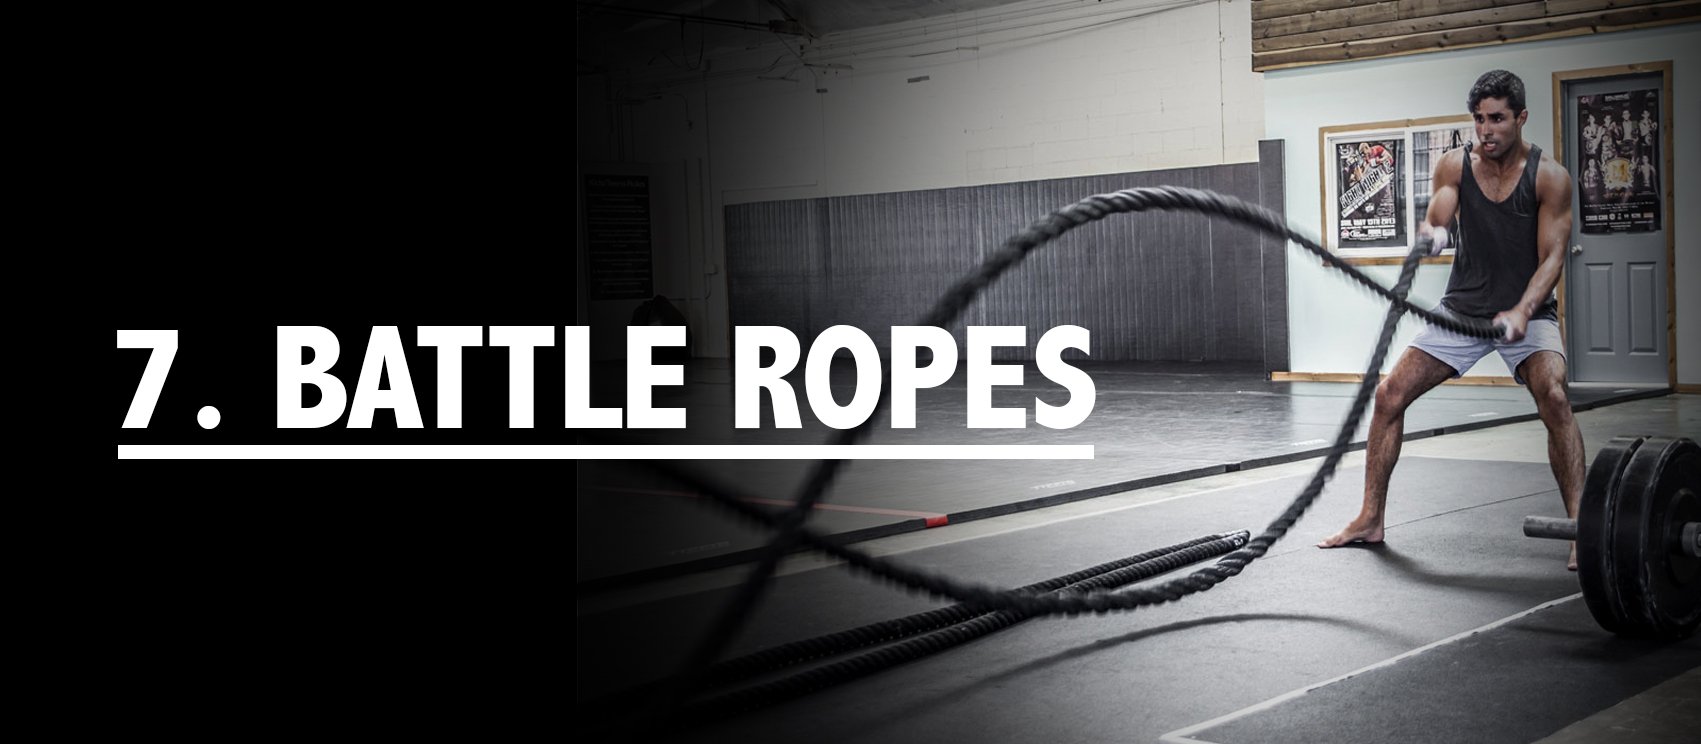 battle-ropes-belly-fat-reduction.jpg